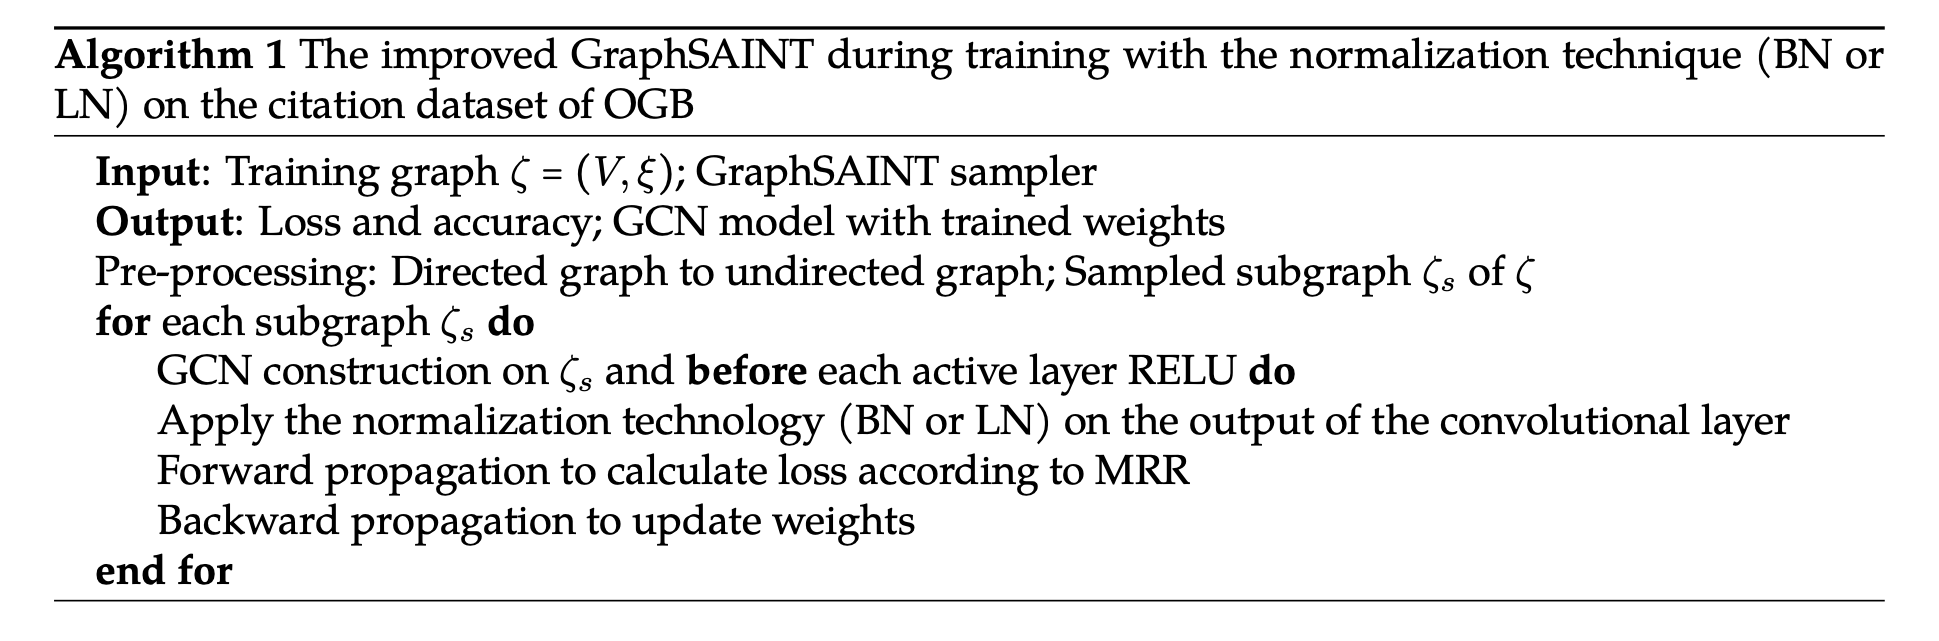 The improved GraphSAINT during training with the normalization technique (BN or LN) on the citation dataset of OGB